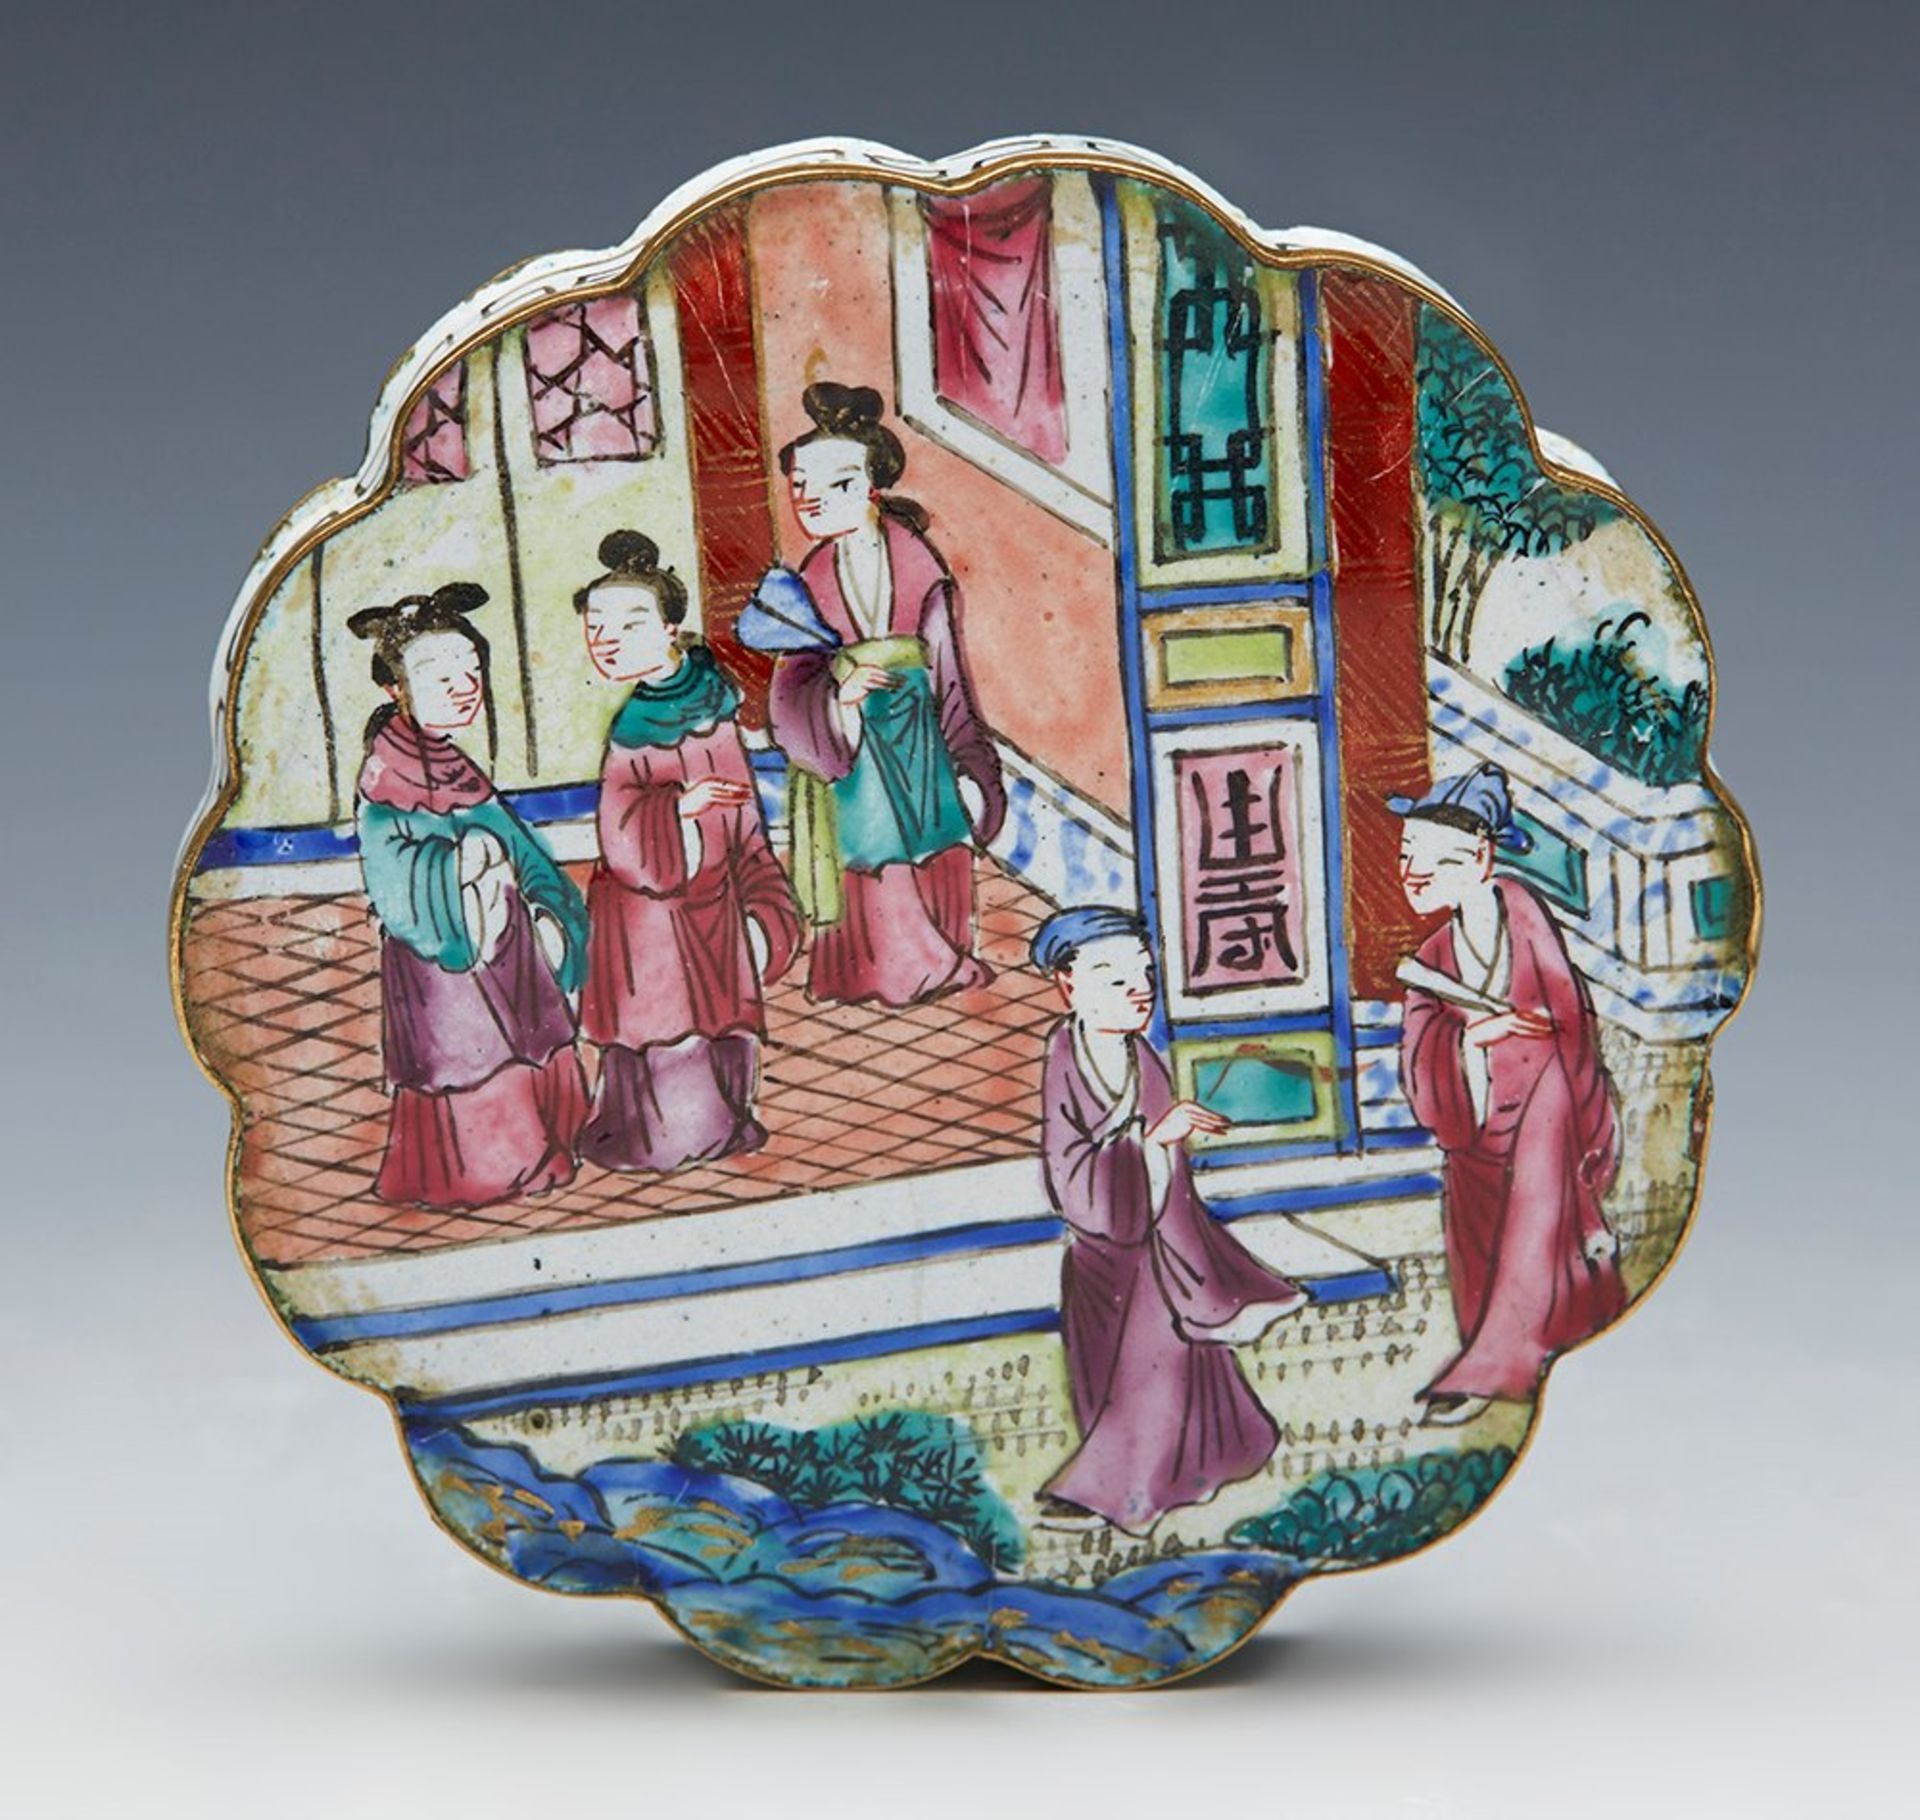 Antique Chinese Canton Enamel Lidded Box With Figures C.1800 - Image 6 of 8